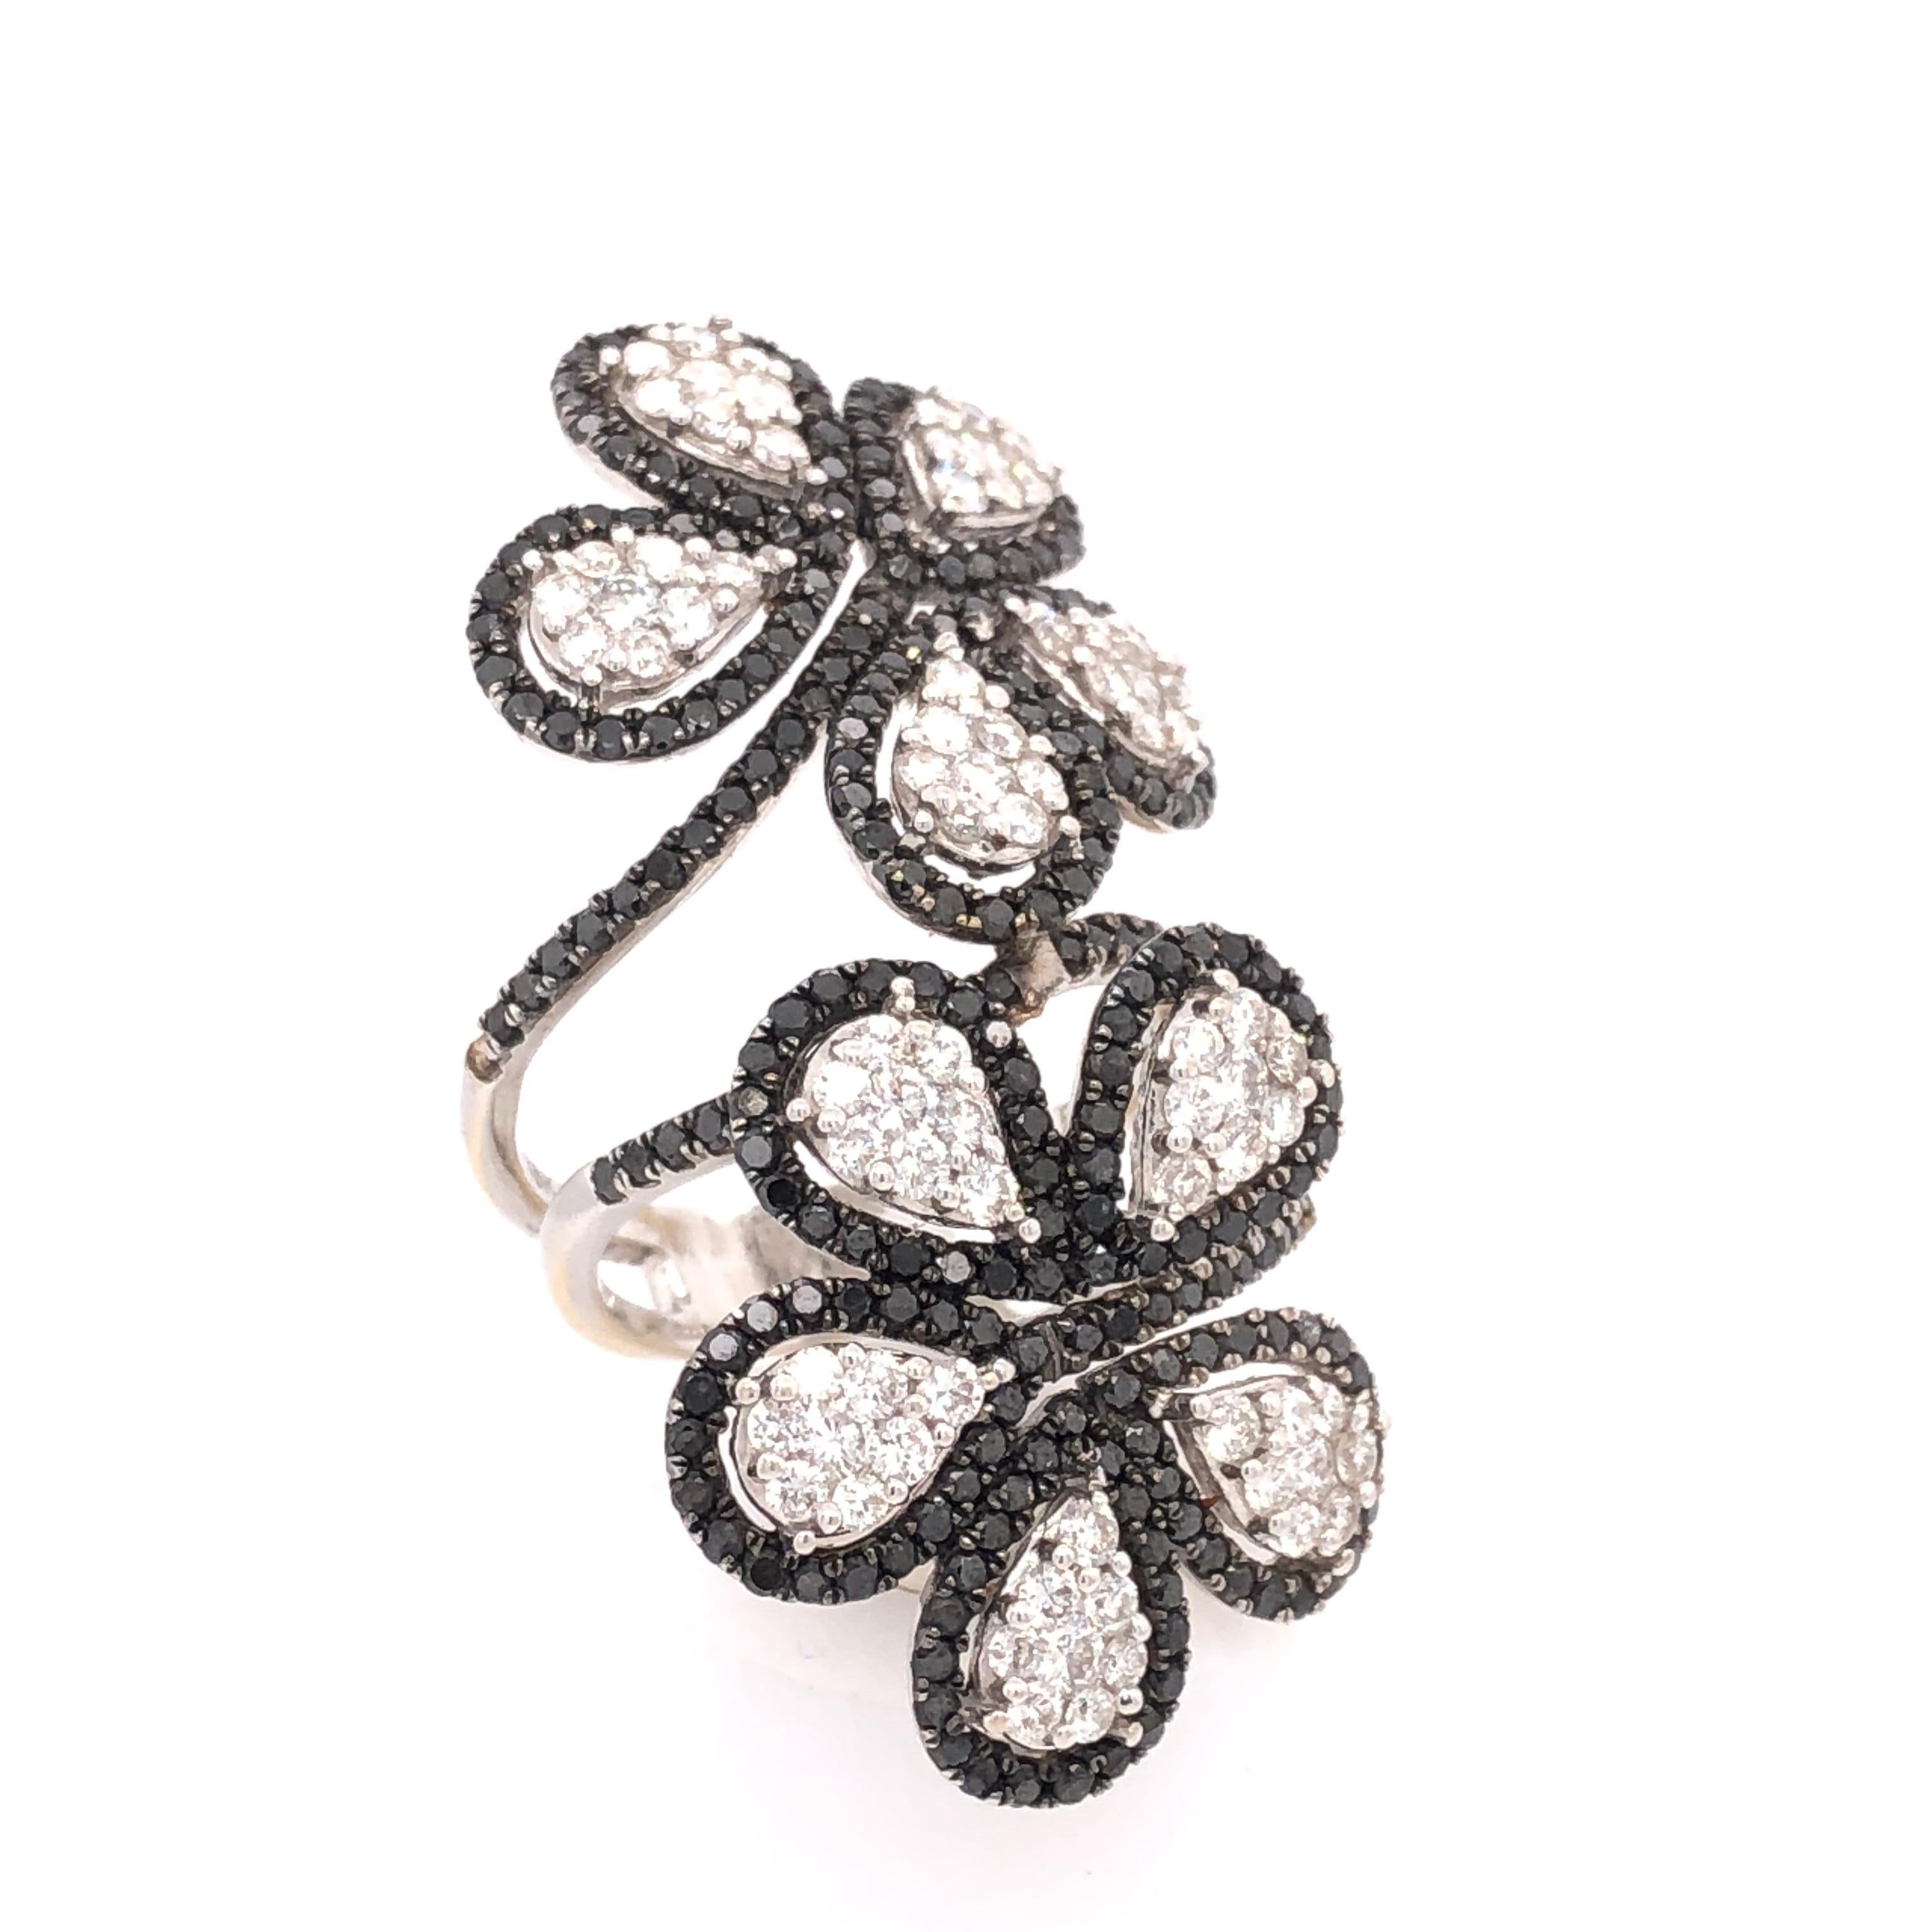 Organic Forms Collection

Black and white Diamond flower ring set in 18K white gold. 

Diamonds: 3.67ct total weight.
All diamonds are G-H/SI stones.
Height - is approximately 4.4cm/2.37inches.
Width at Bottom - is approximately 2.3cm/0.90inches.
